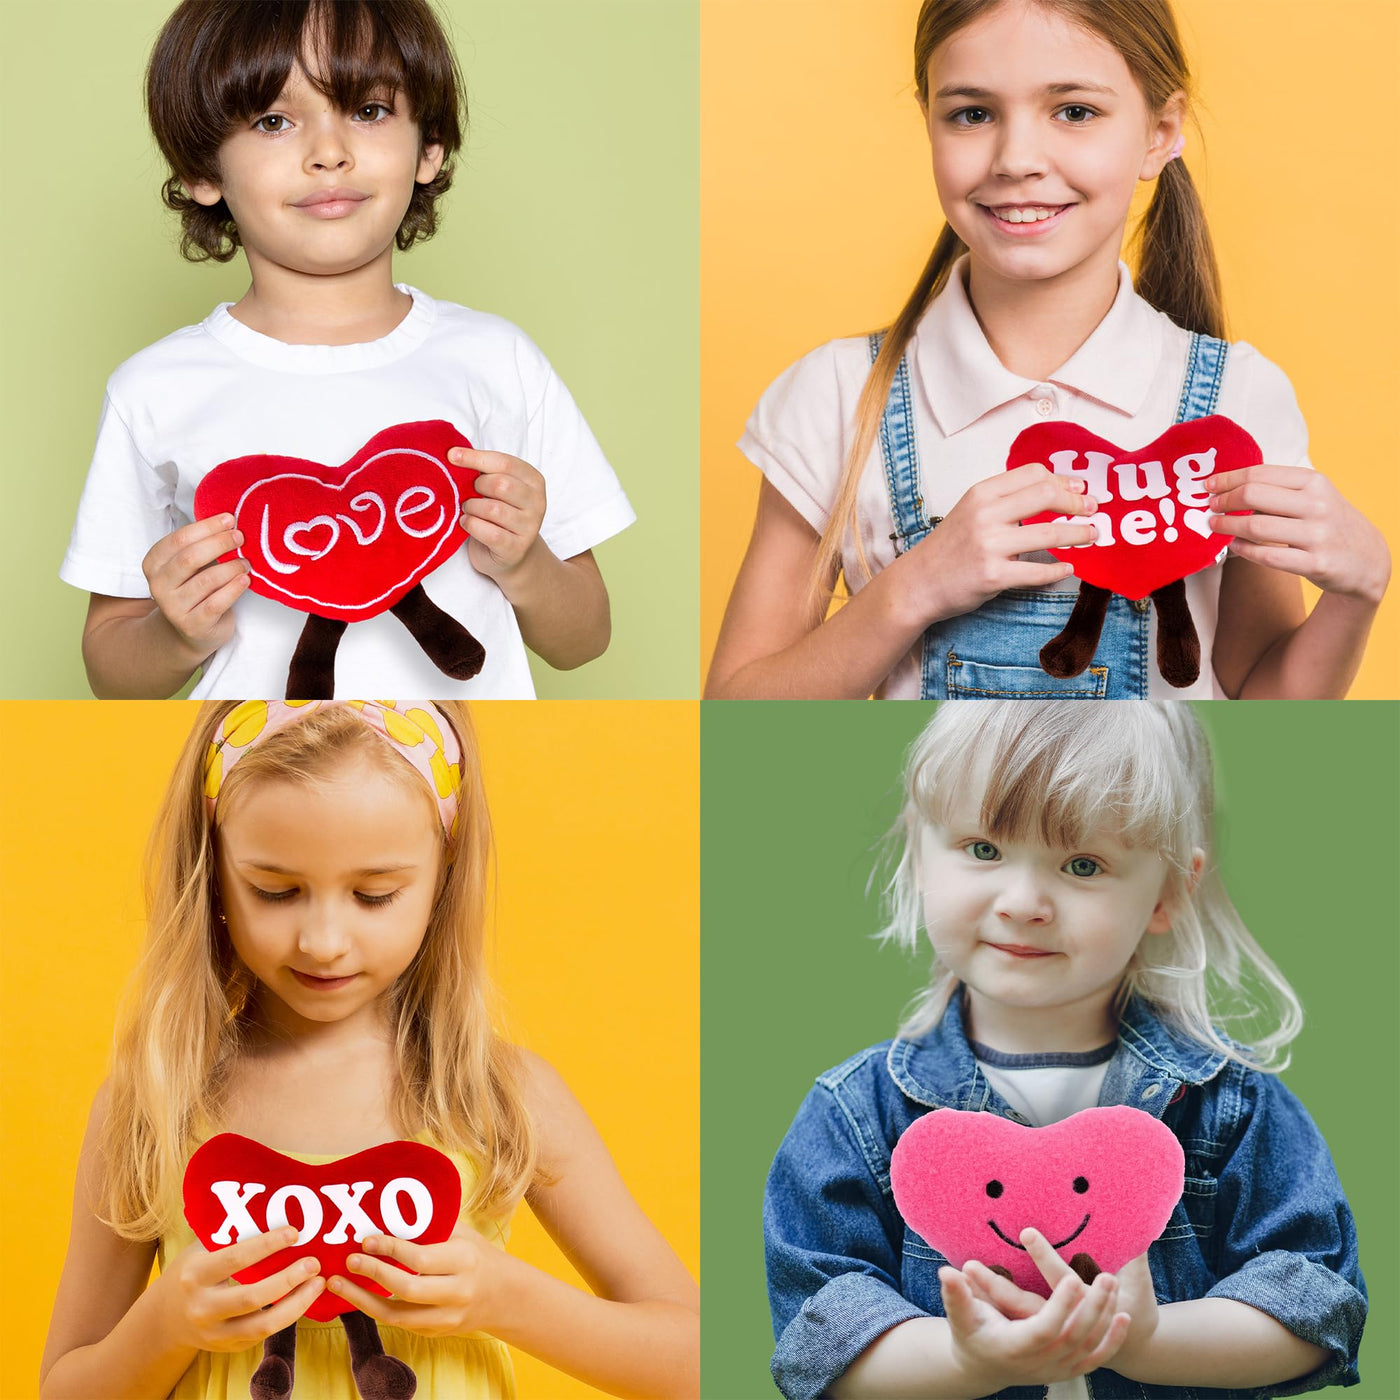 Set of 4 Small Valentines Plush Hearts - Cute Love Heart Plush Toys in Assorted Designs - Stuffed Love Heart Toy Set